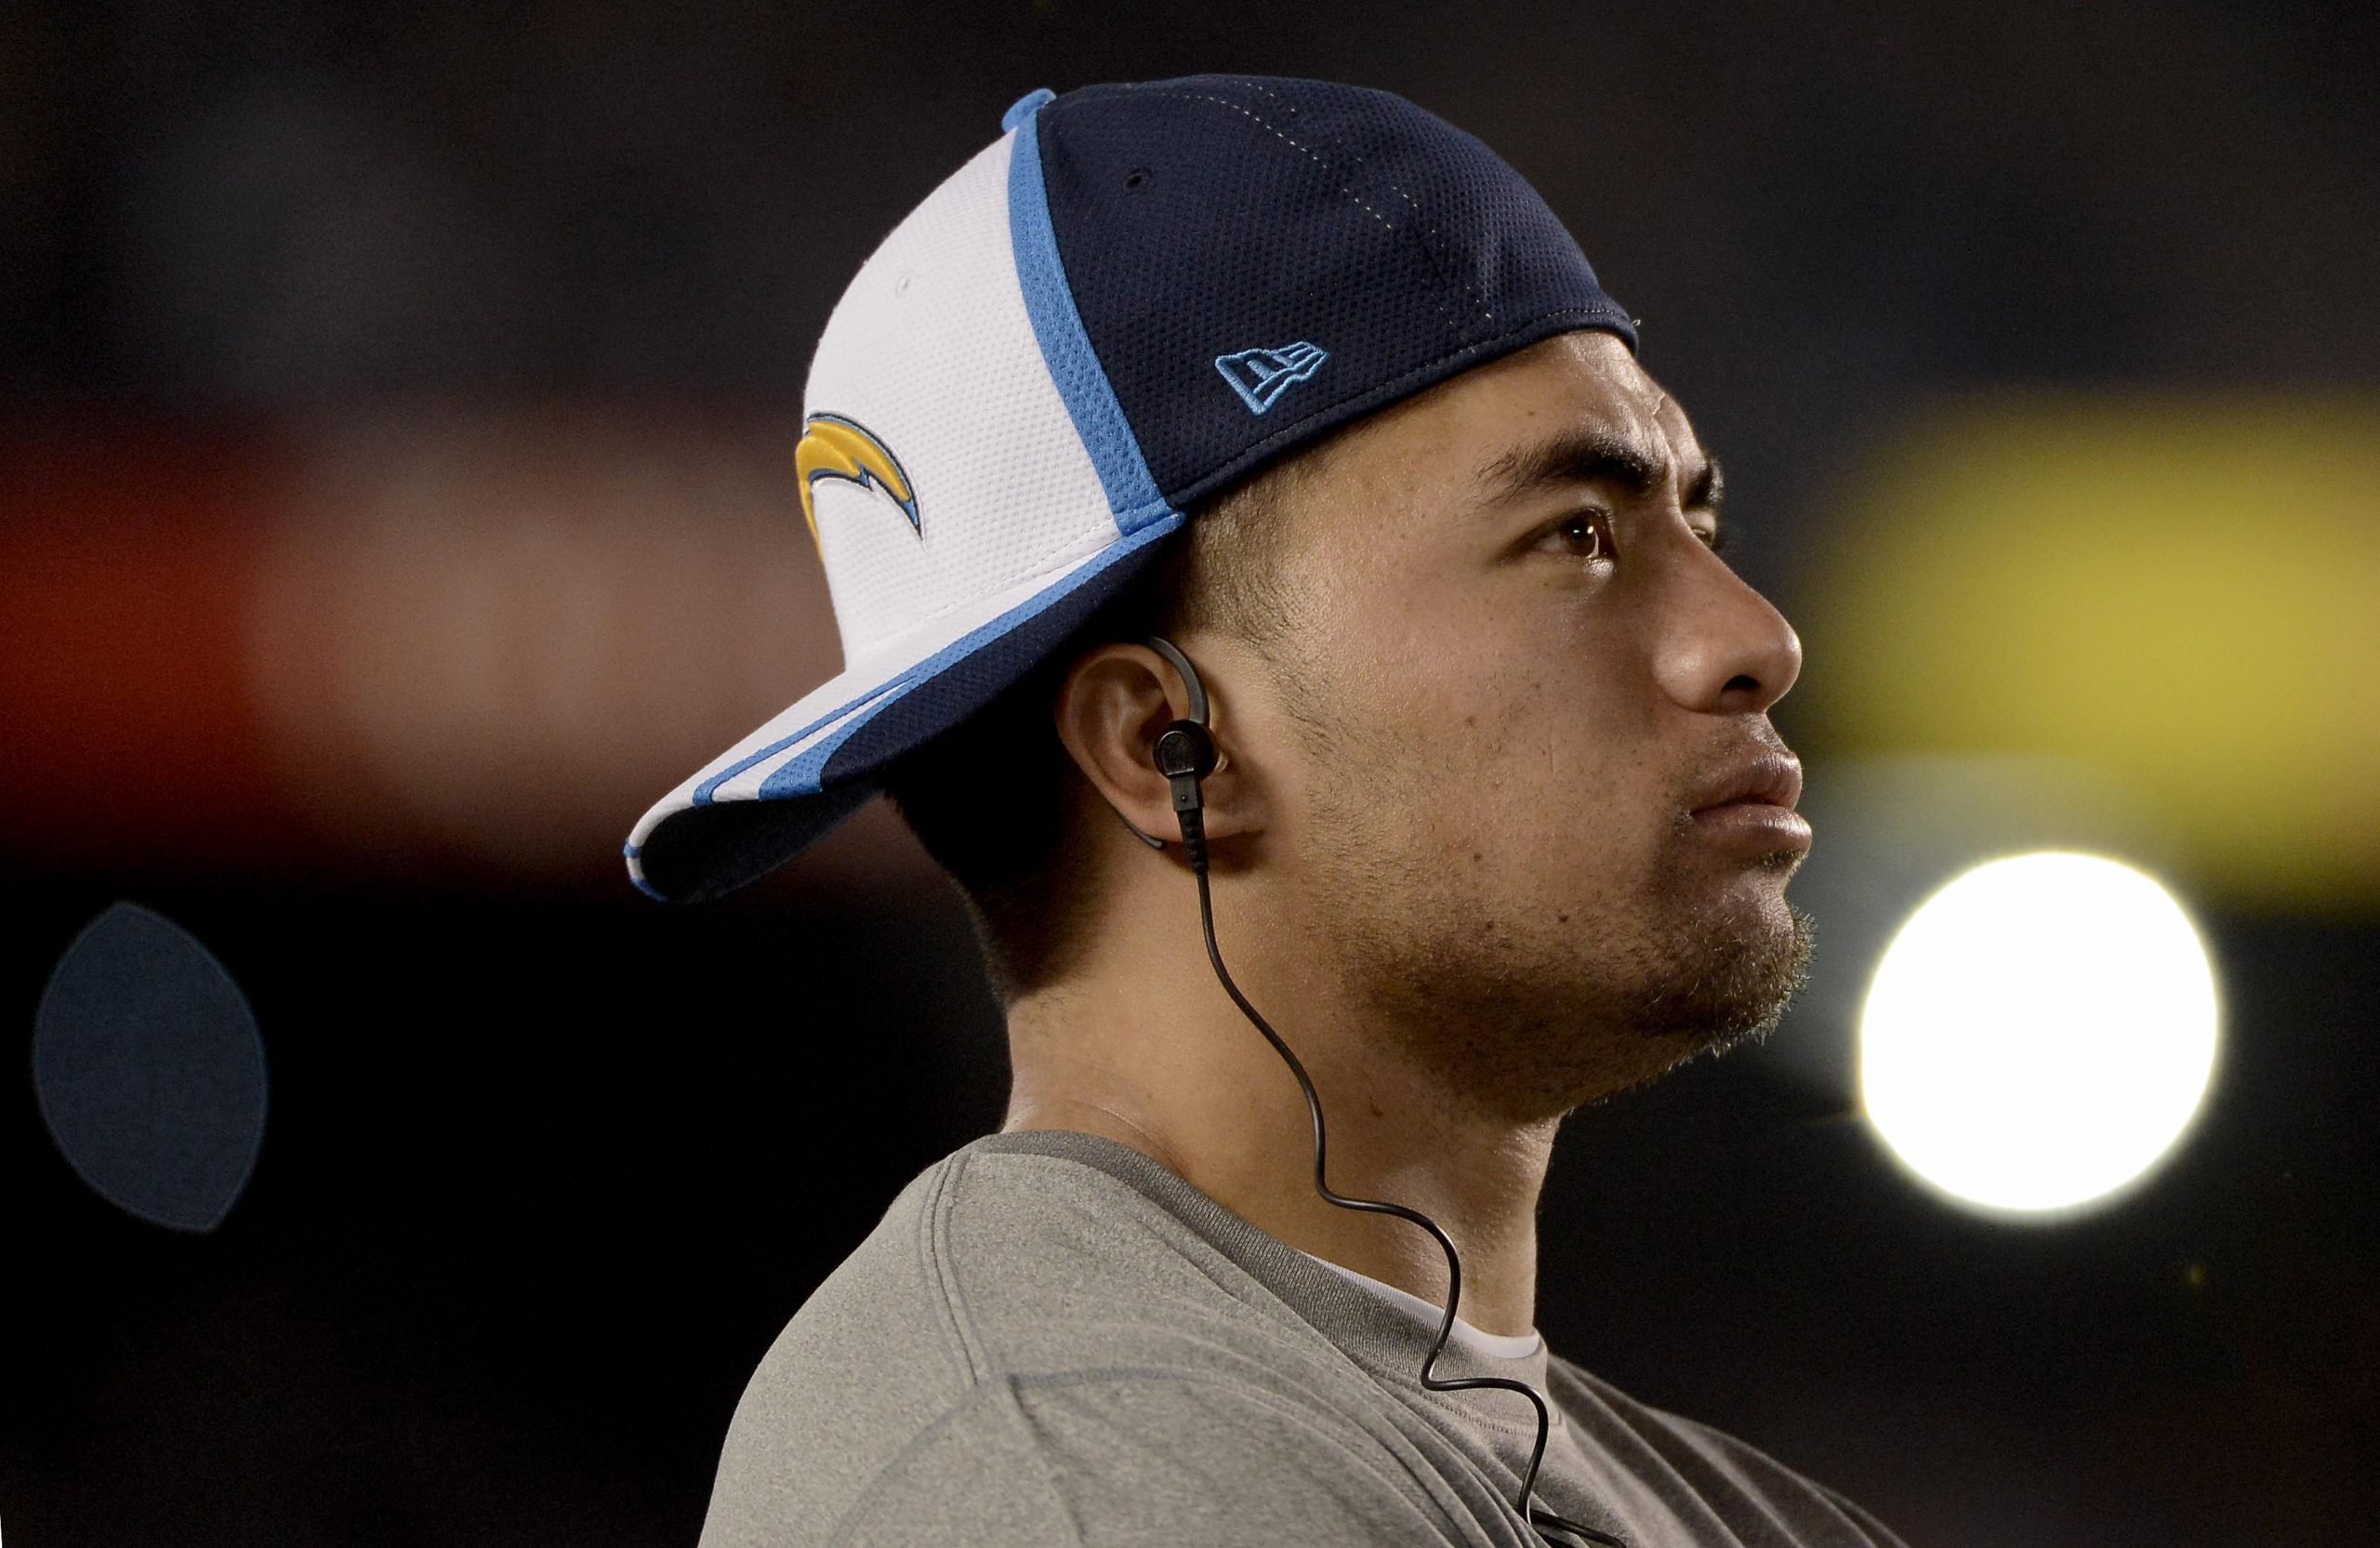 Manti Te'o, subject of a new Untold Netflix documentary, plays at a preseason game for the San Diego Chargers